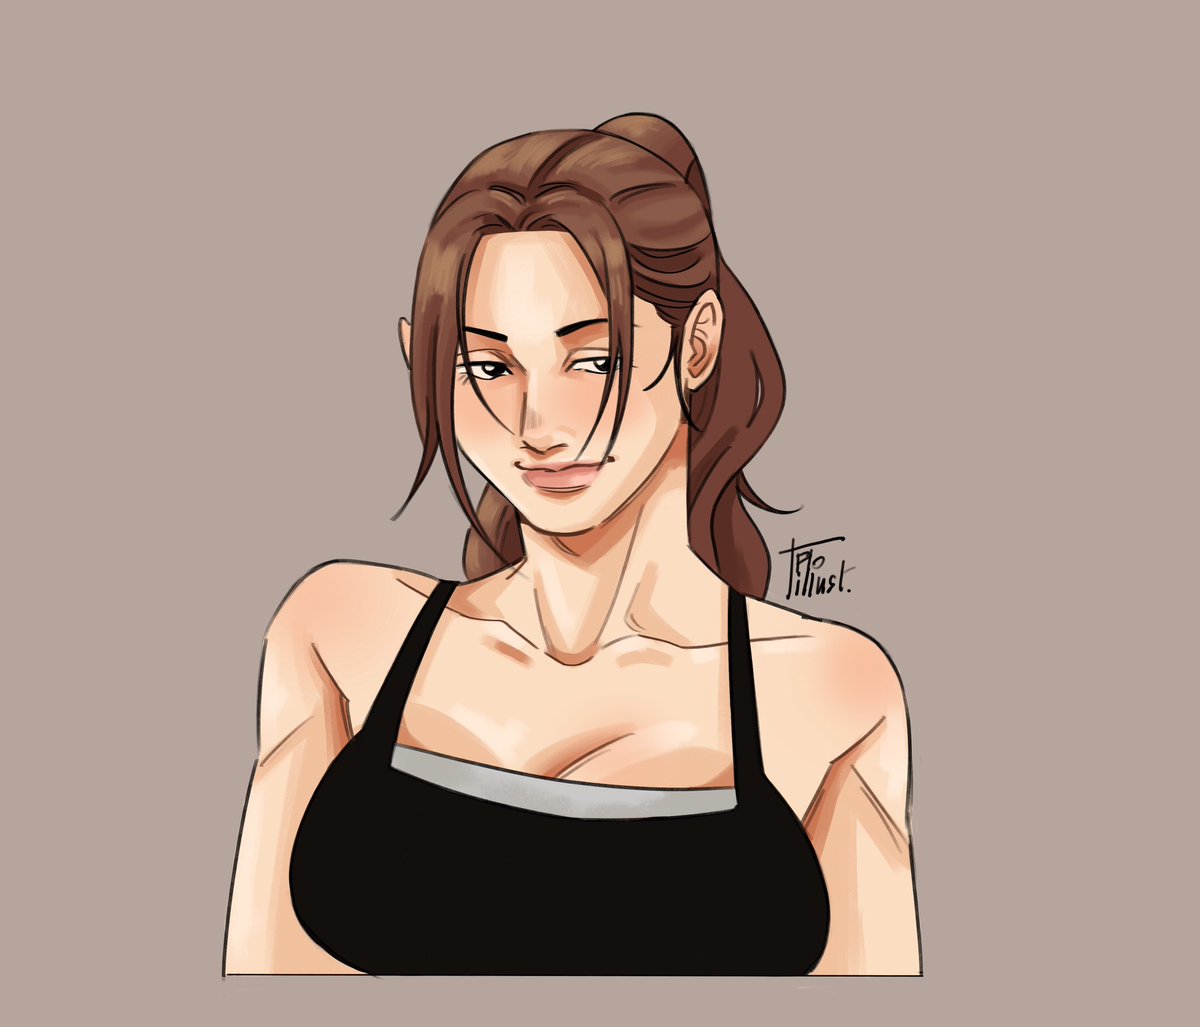 Quick drawing of my queen 

#ResidentEvil #claireredfield